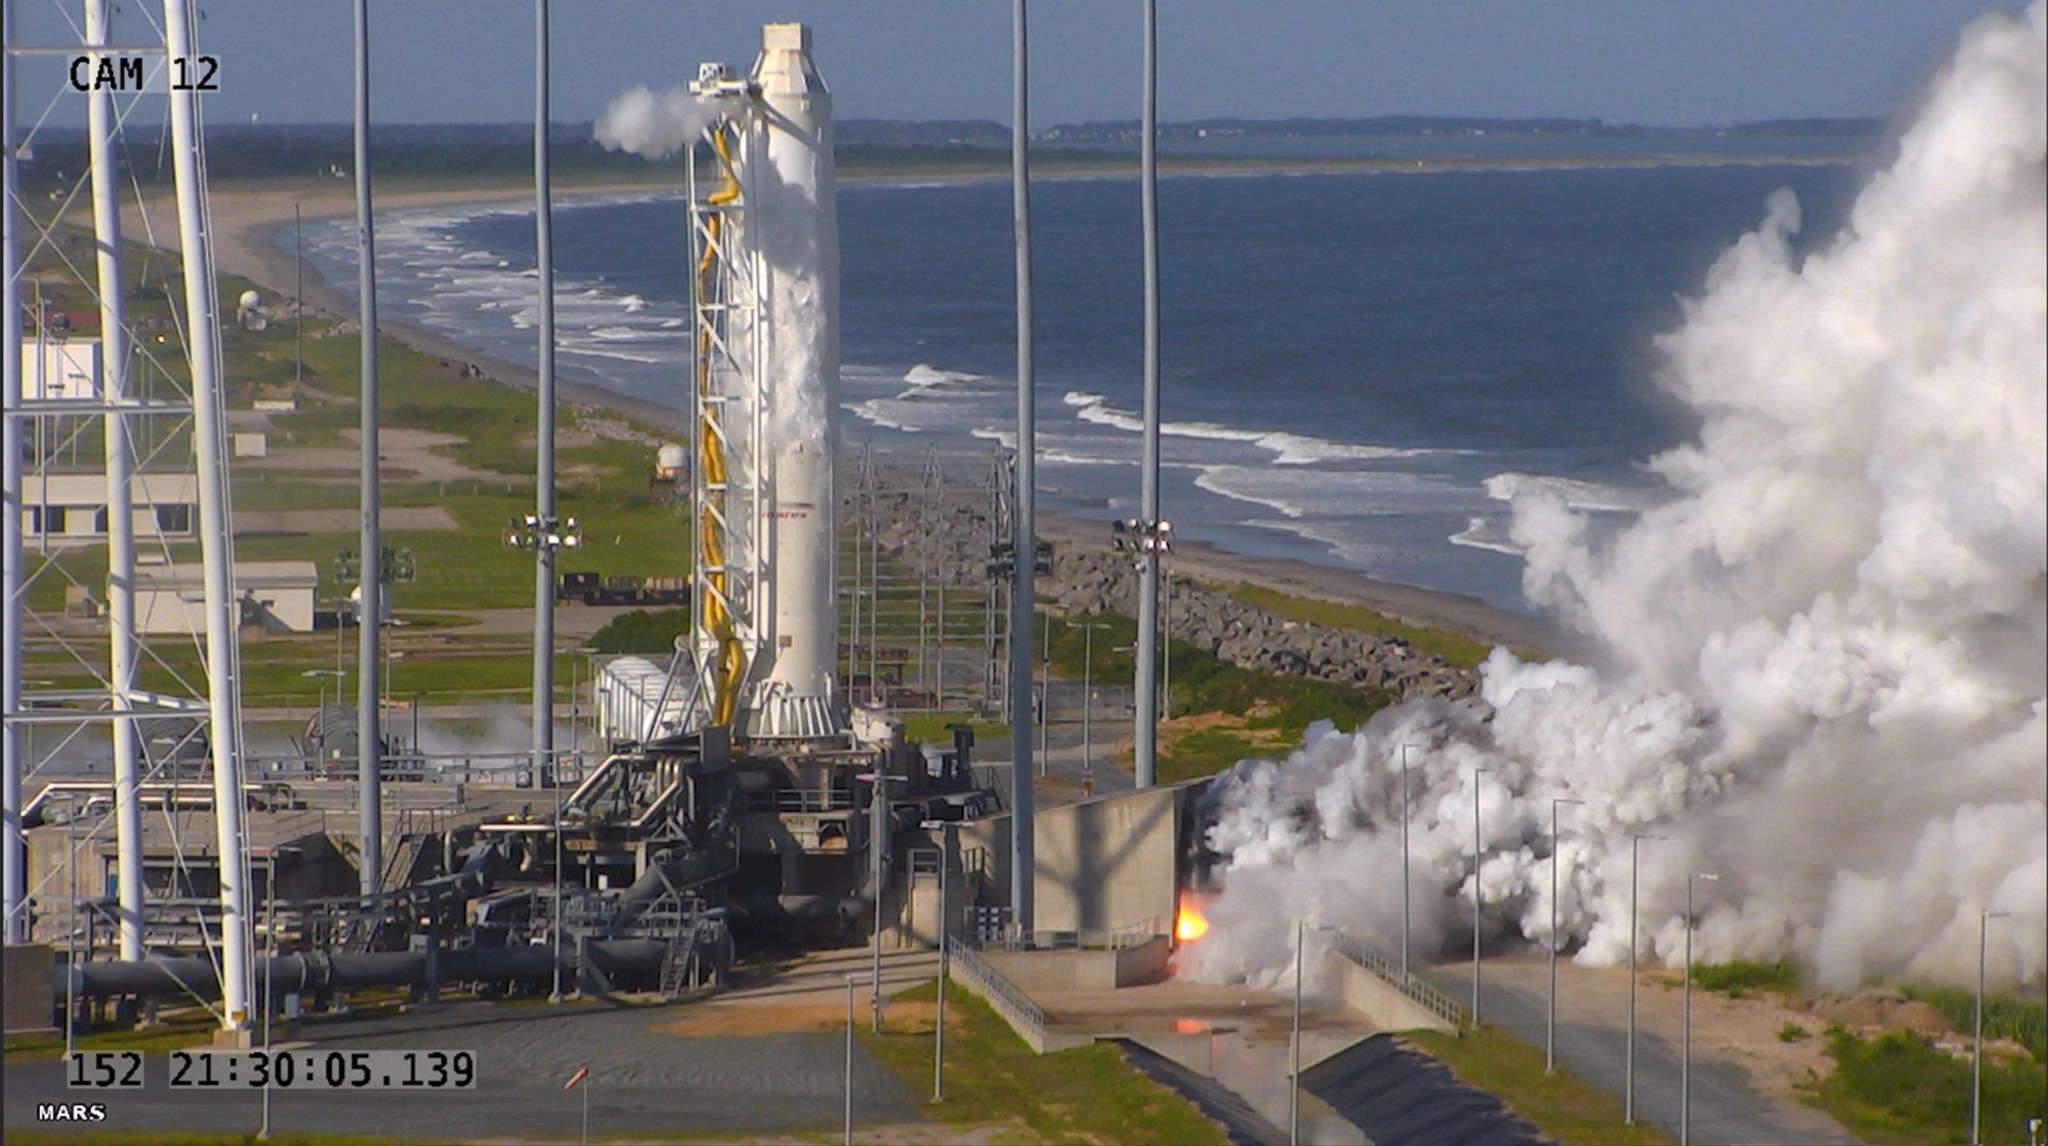 A screenshot of a video feed showing the first stage of a rocket attached to a the pad, with a flaming shooting out of the side with a large plume of smoke.